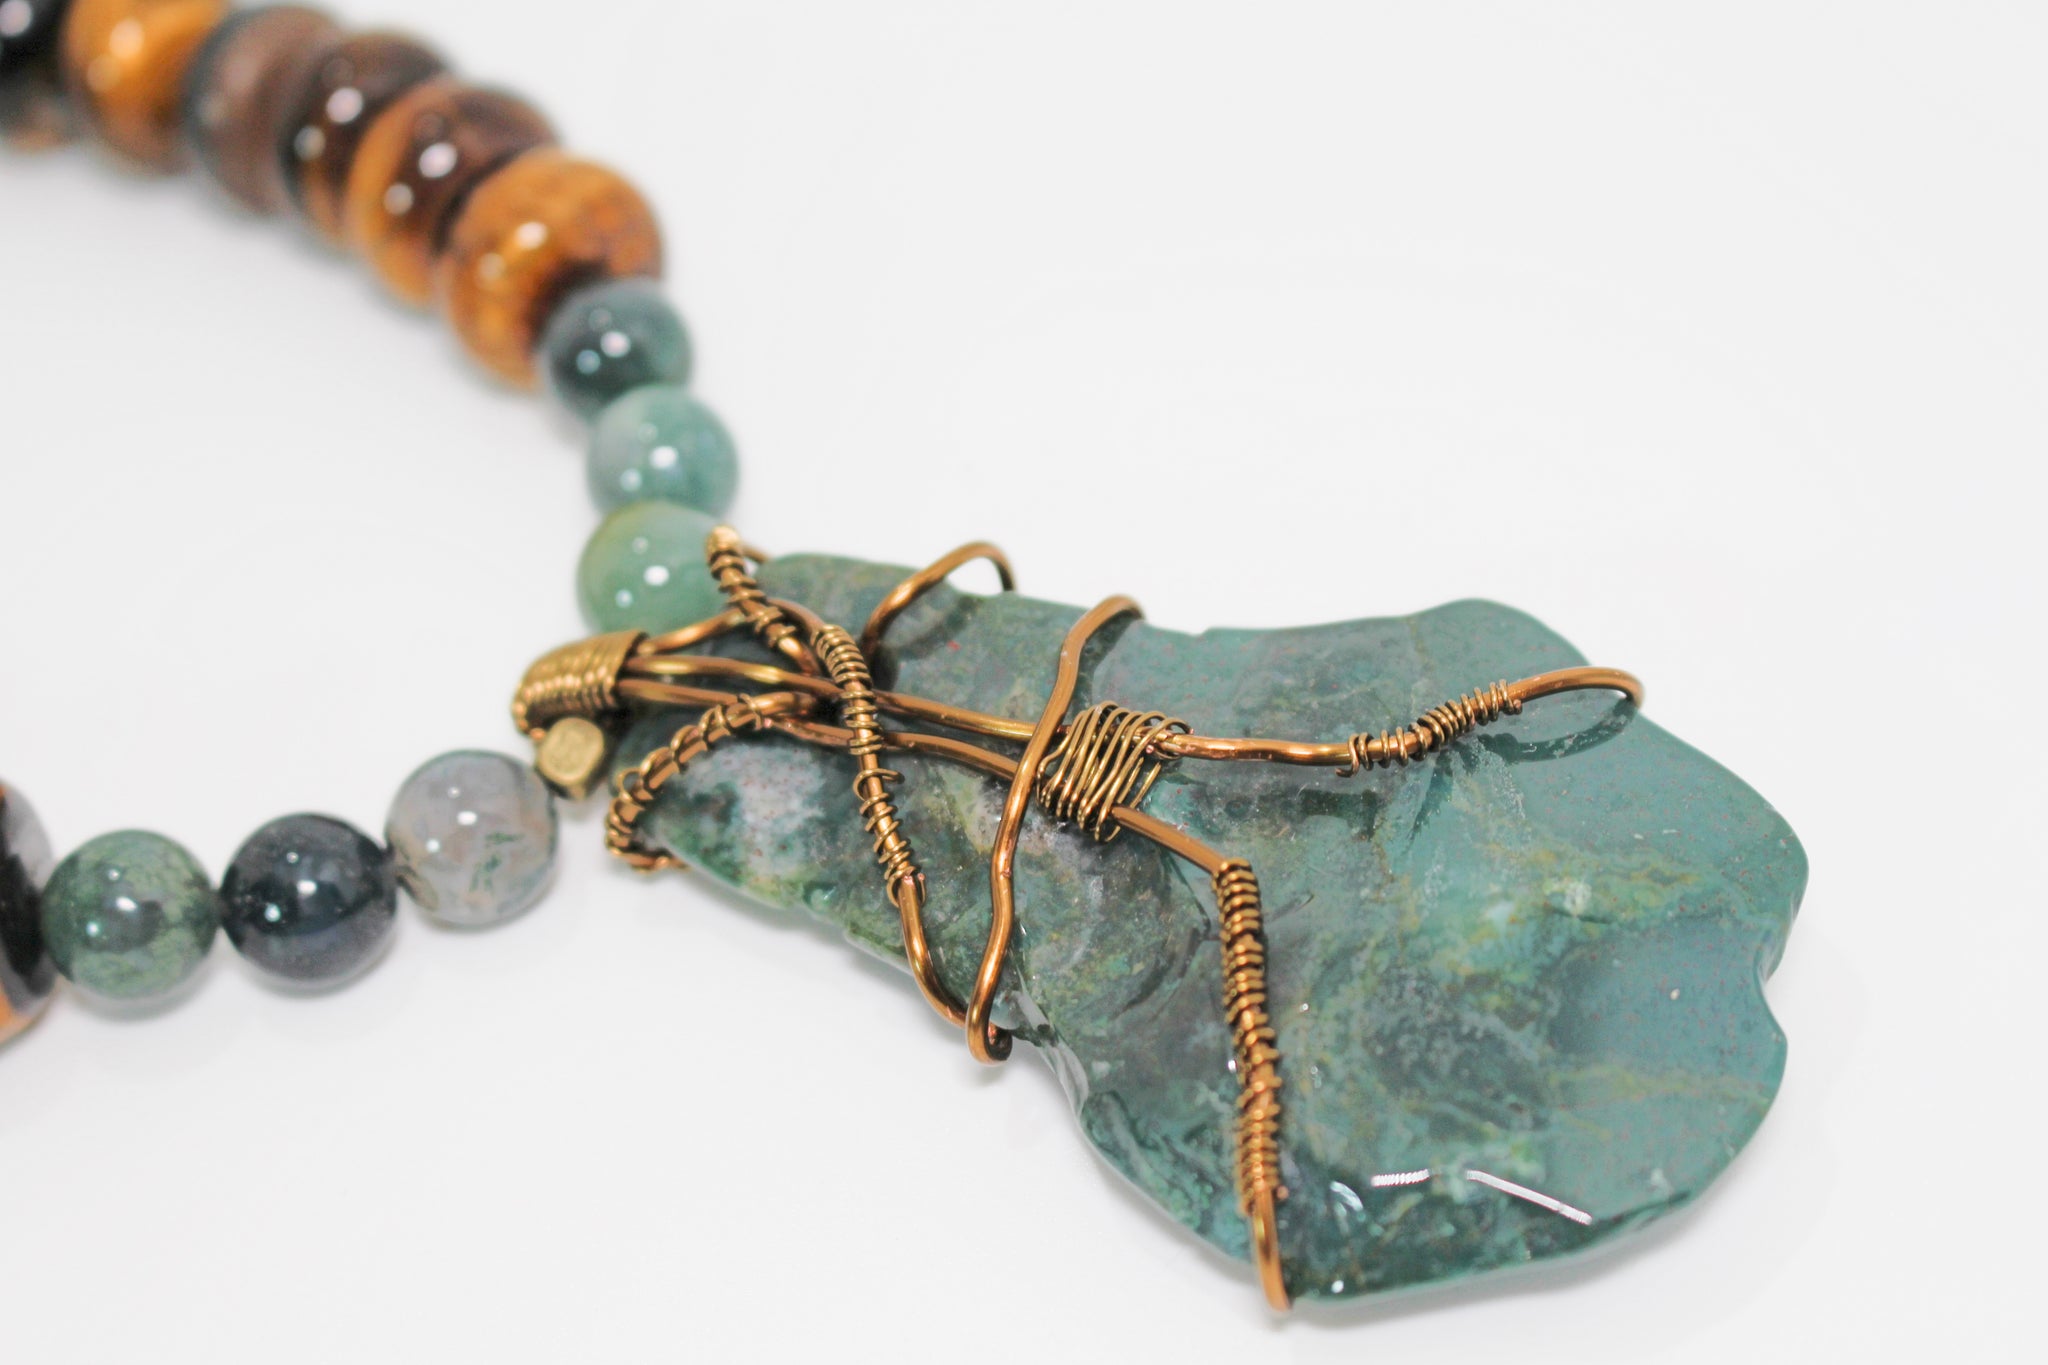 KD-0106 Tiger's Eye Necklace w/ Moss Agate Wire Wrapped Pendant, 20 Inches